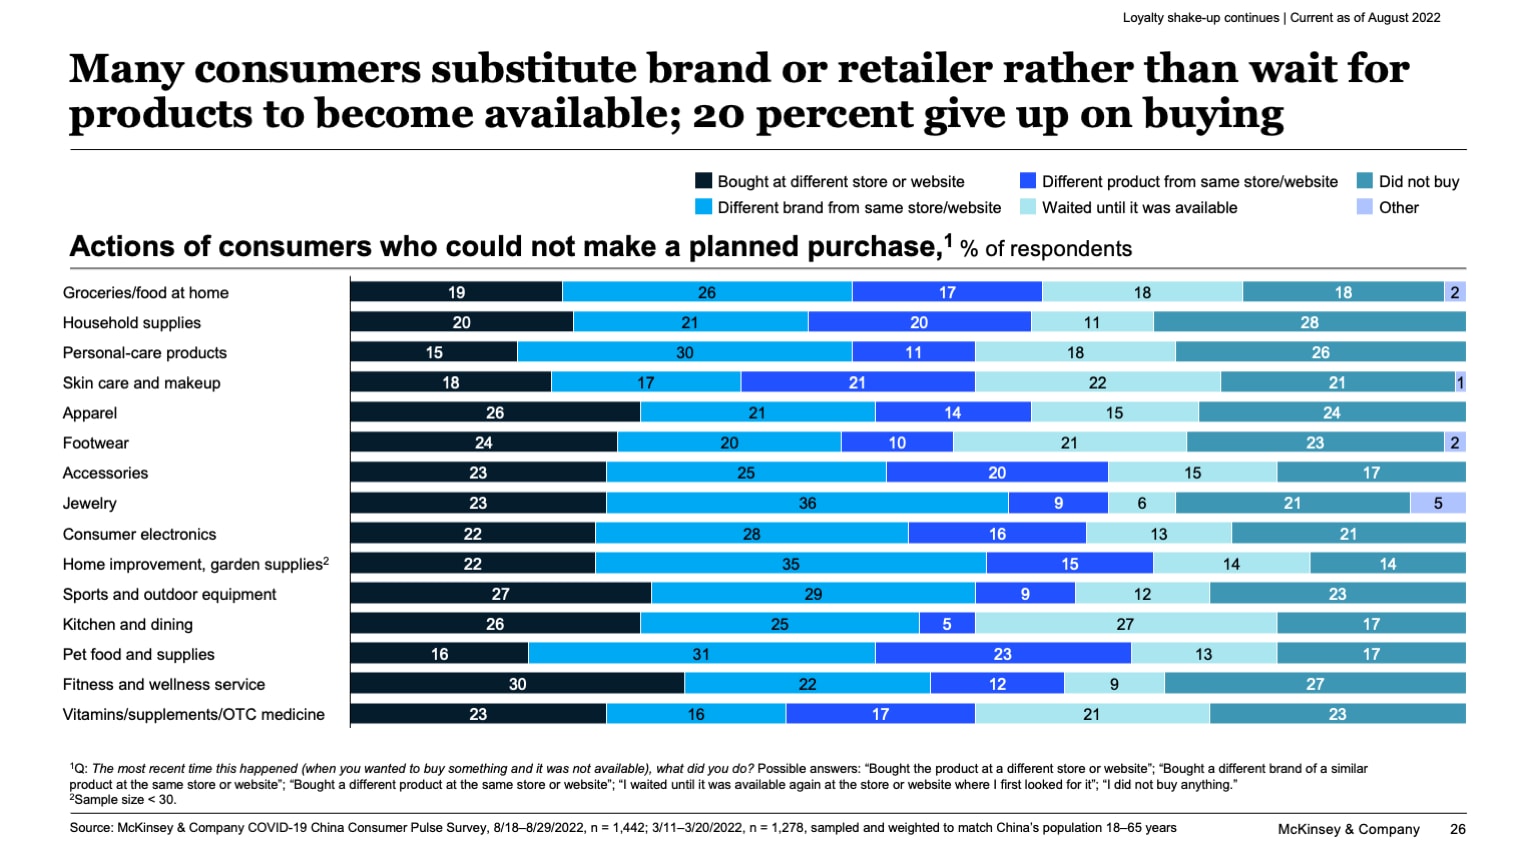 Many consumers substitute brand or retailer rather than wait for products to become available; 20 percent give up on buying